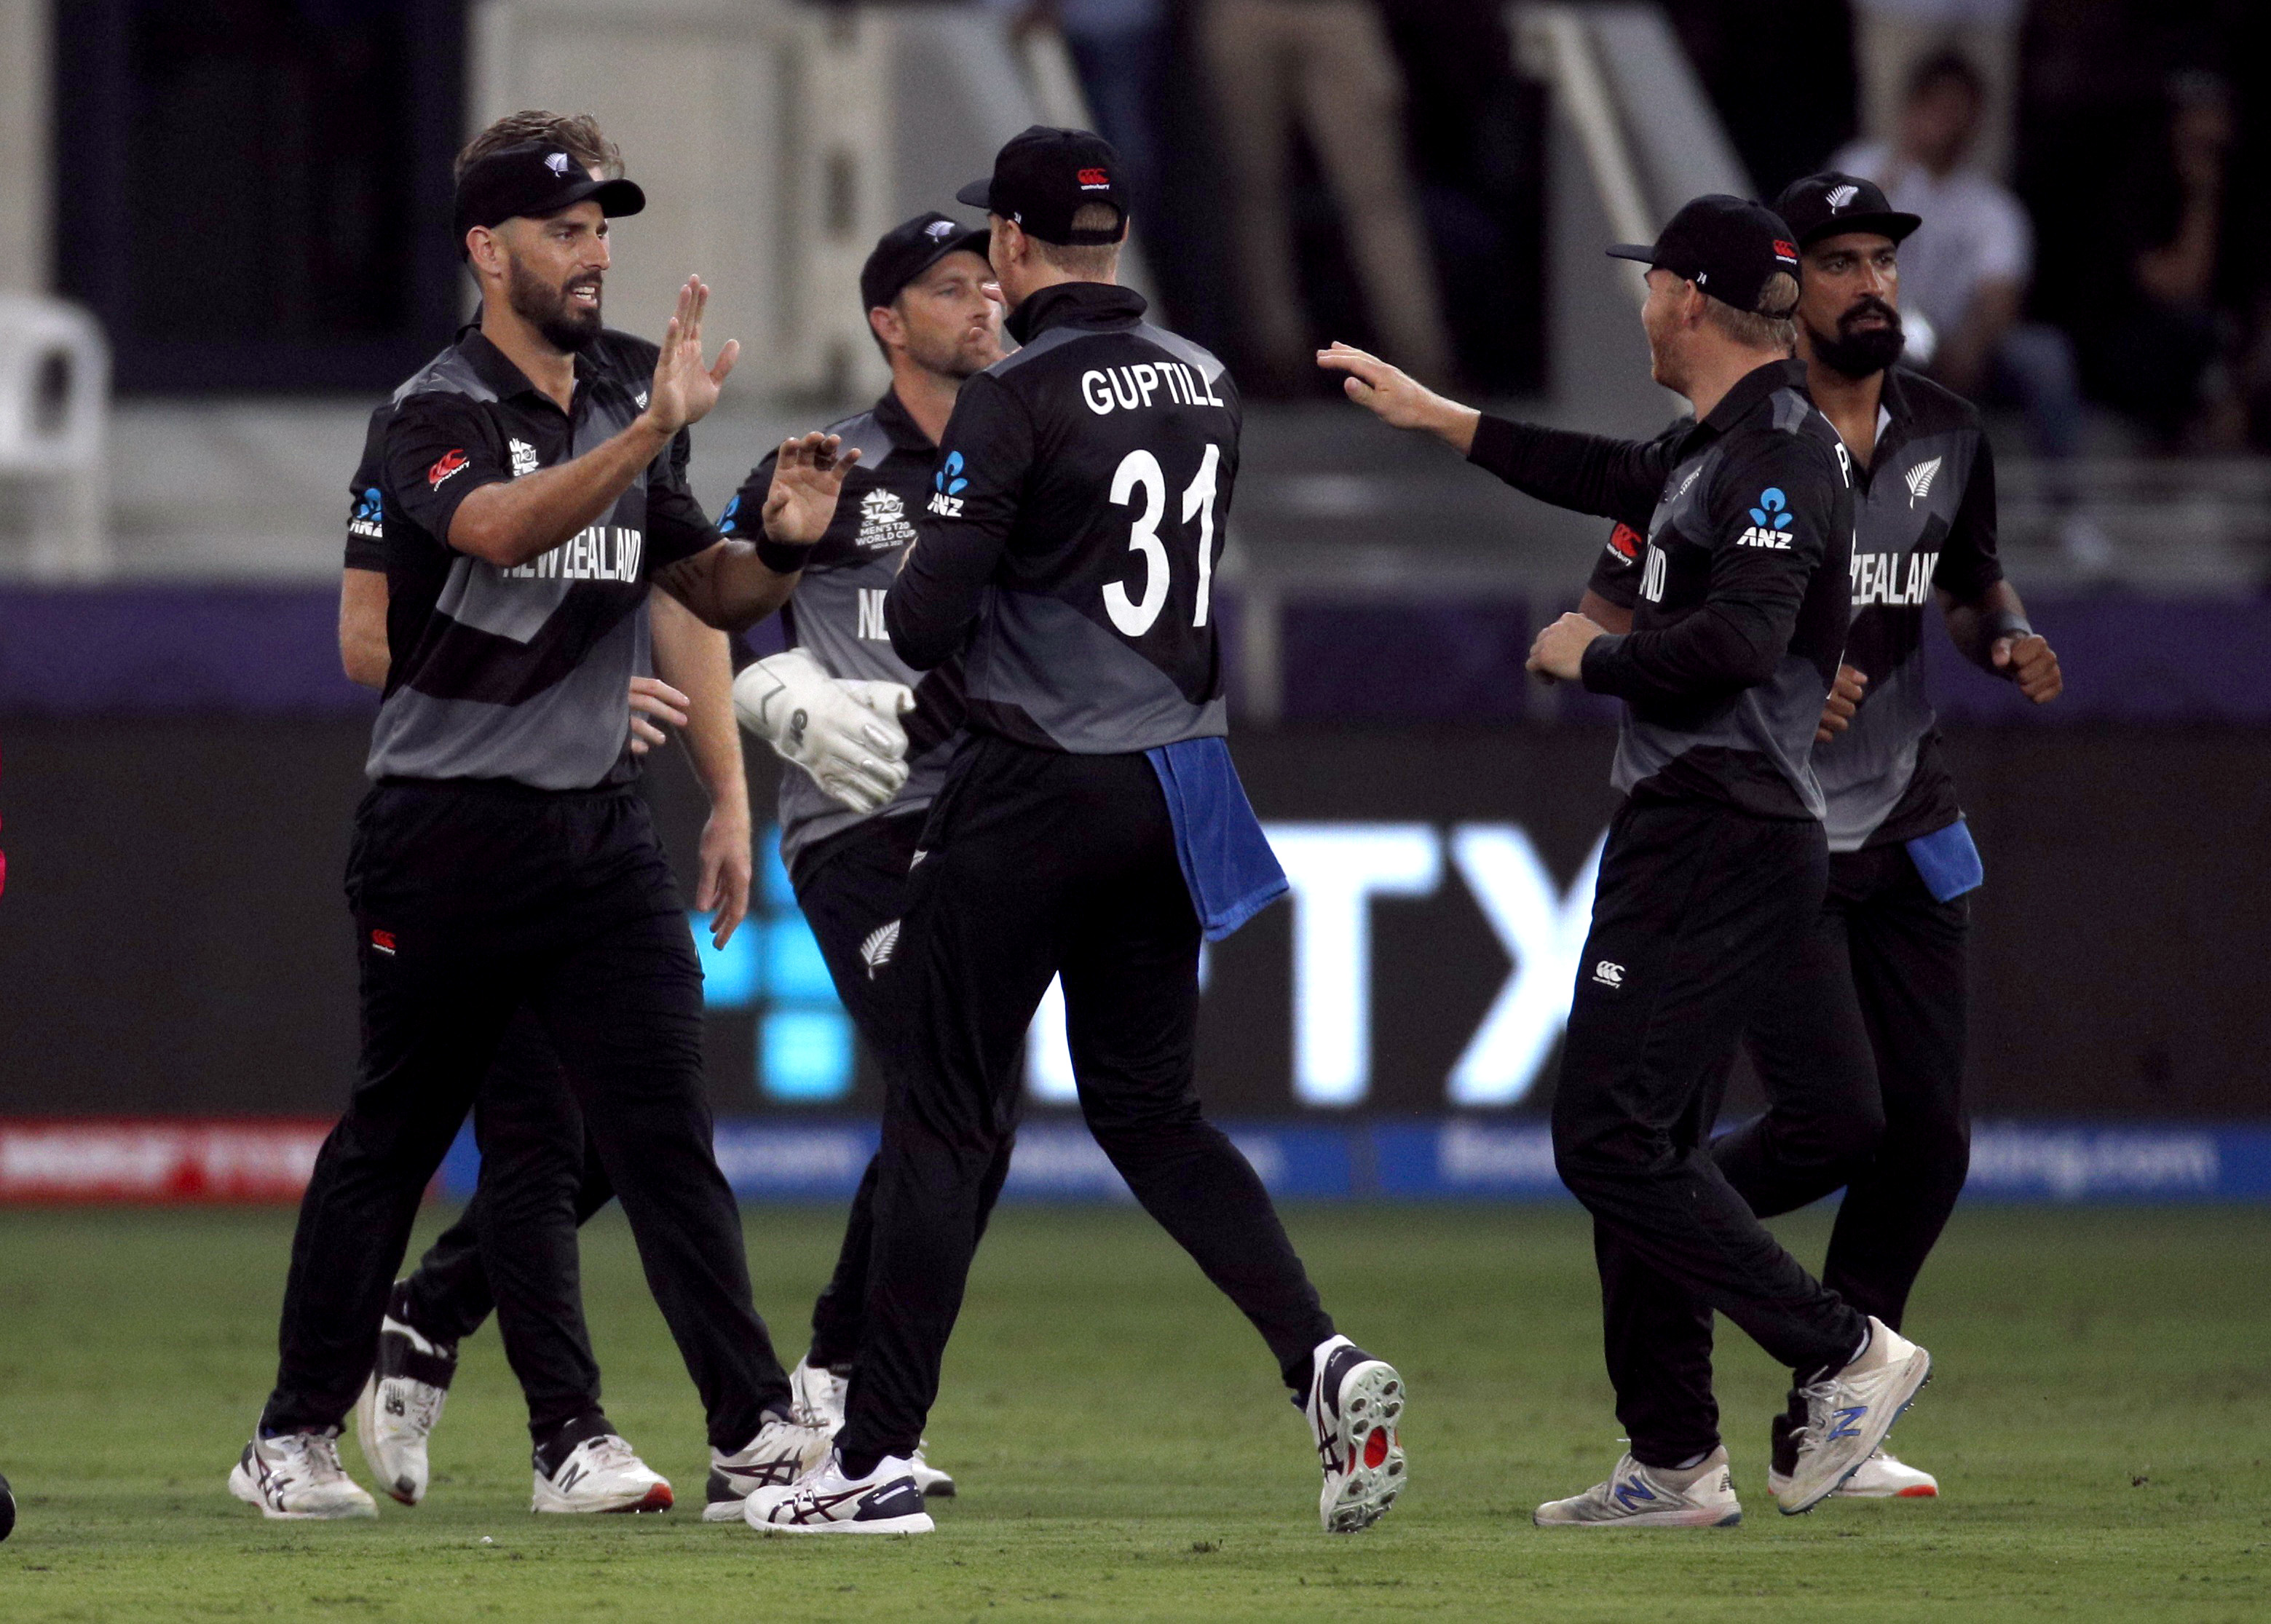 ICC Men's T20 World Cup - Super 12 - Group 2 - India v New Zealand